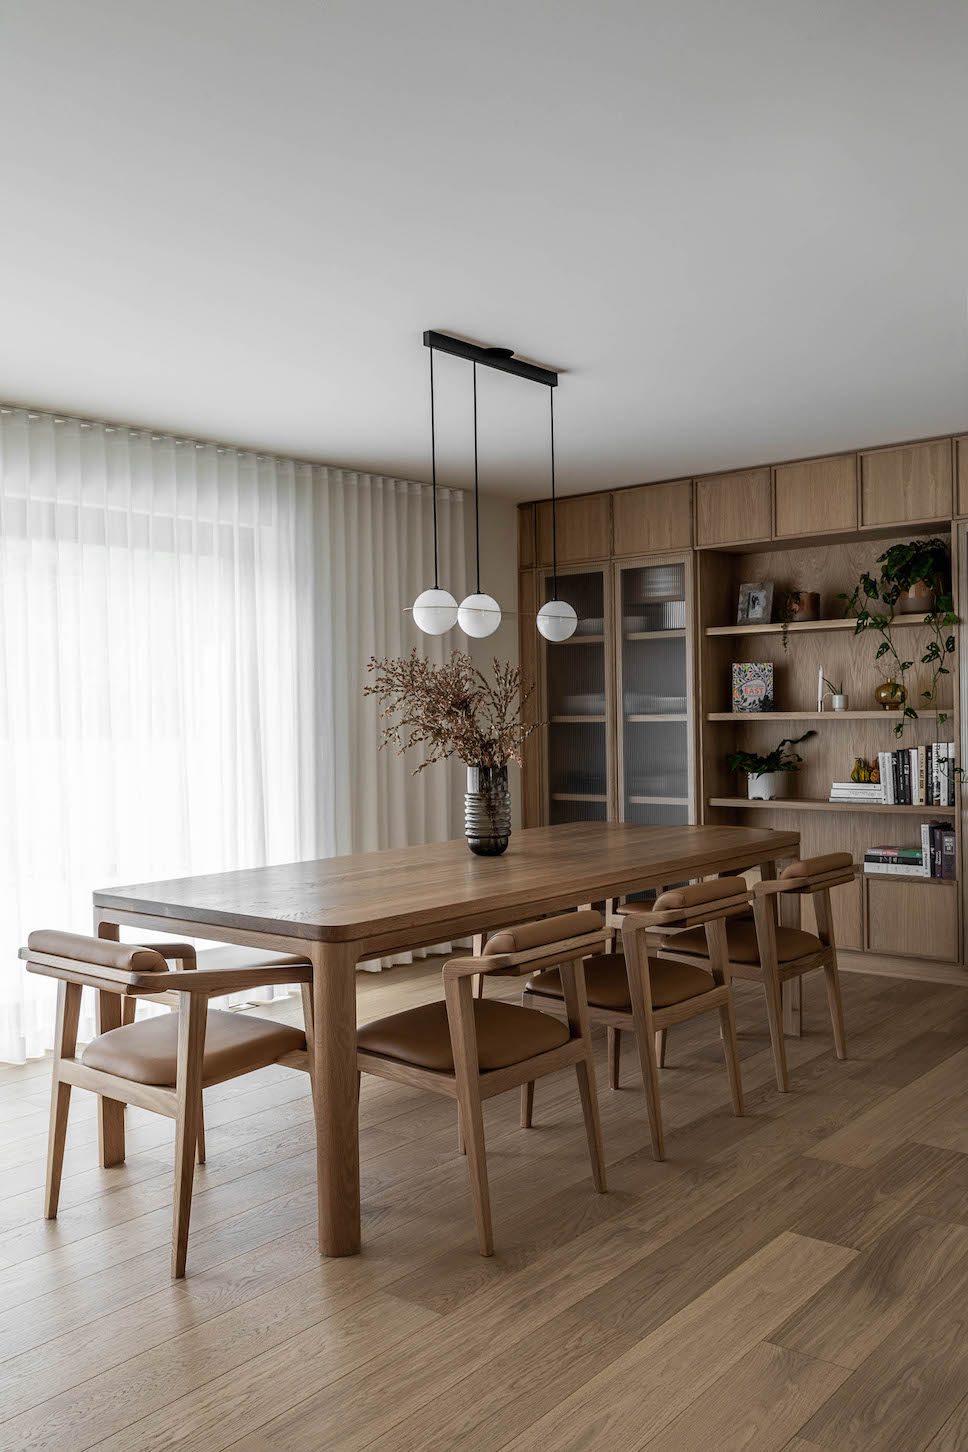 Dining room with four chairs, in wood style, and shelfs for dishes